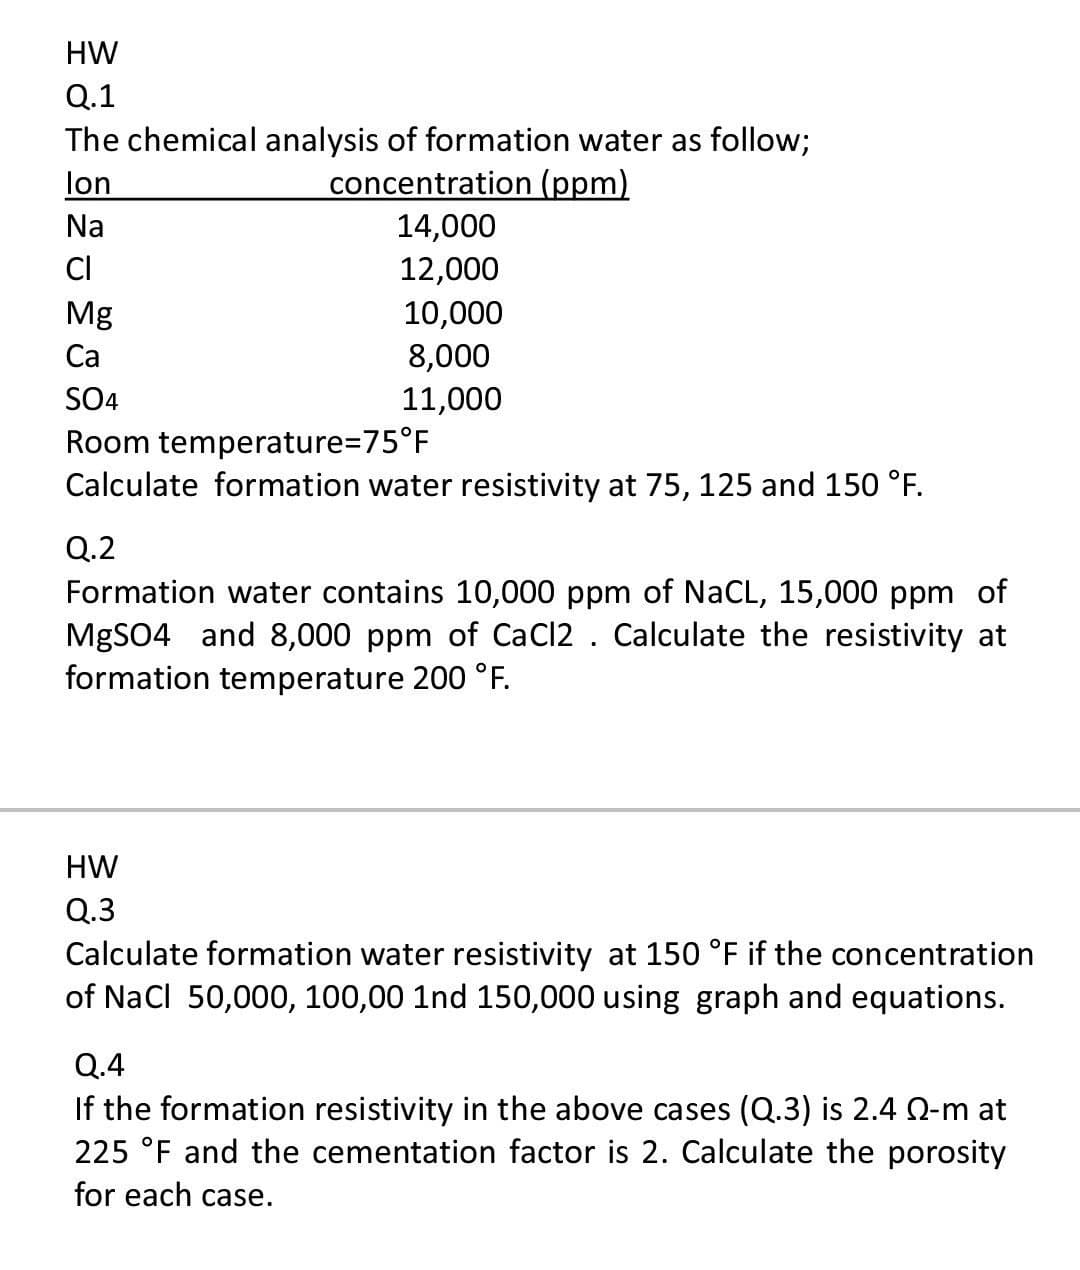 HW
Q.1
The chemical analysis of formation water as follow;
concentration (ppm)
lon
Na
14,000
CI
12,000
Mg
10,000
Ca
8,000
SO4
11,000
Room temperature=D75°F
Calculate formation water resistivity at 75, 125 and 150 °F.
Q.2
Formation water contains 10,000 ppm of NaCL, 15,000 ppm of
MgSO4 and 8,000 ppm of CaCl2 . Calculate the resistivity at
formation temperature 200 °F.
HW
Q.3
Calculate formation water resistivity at 150 °F if the concentration
of Nacl 50,000, 100,00 1nd 150,000 using graph and equations.
Q.4
If the formation resistivity in the above cases (Q.3) is 2.4 Q-m at
225 °F and the cementation factor is 2. Calculate the porosity
for each case.
